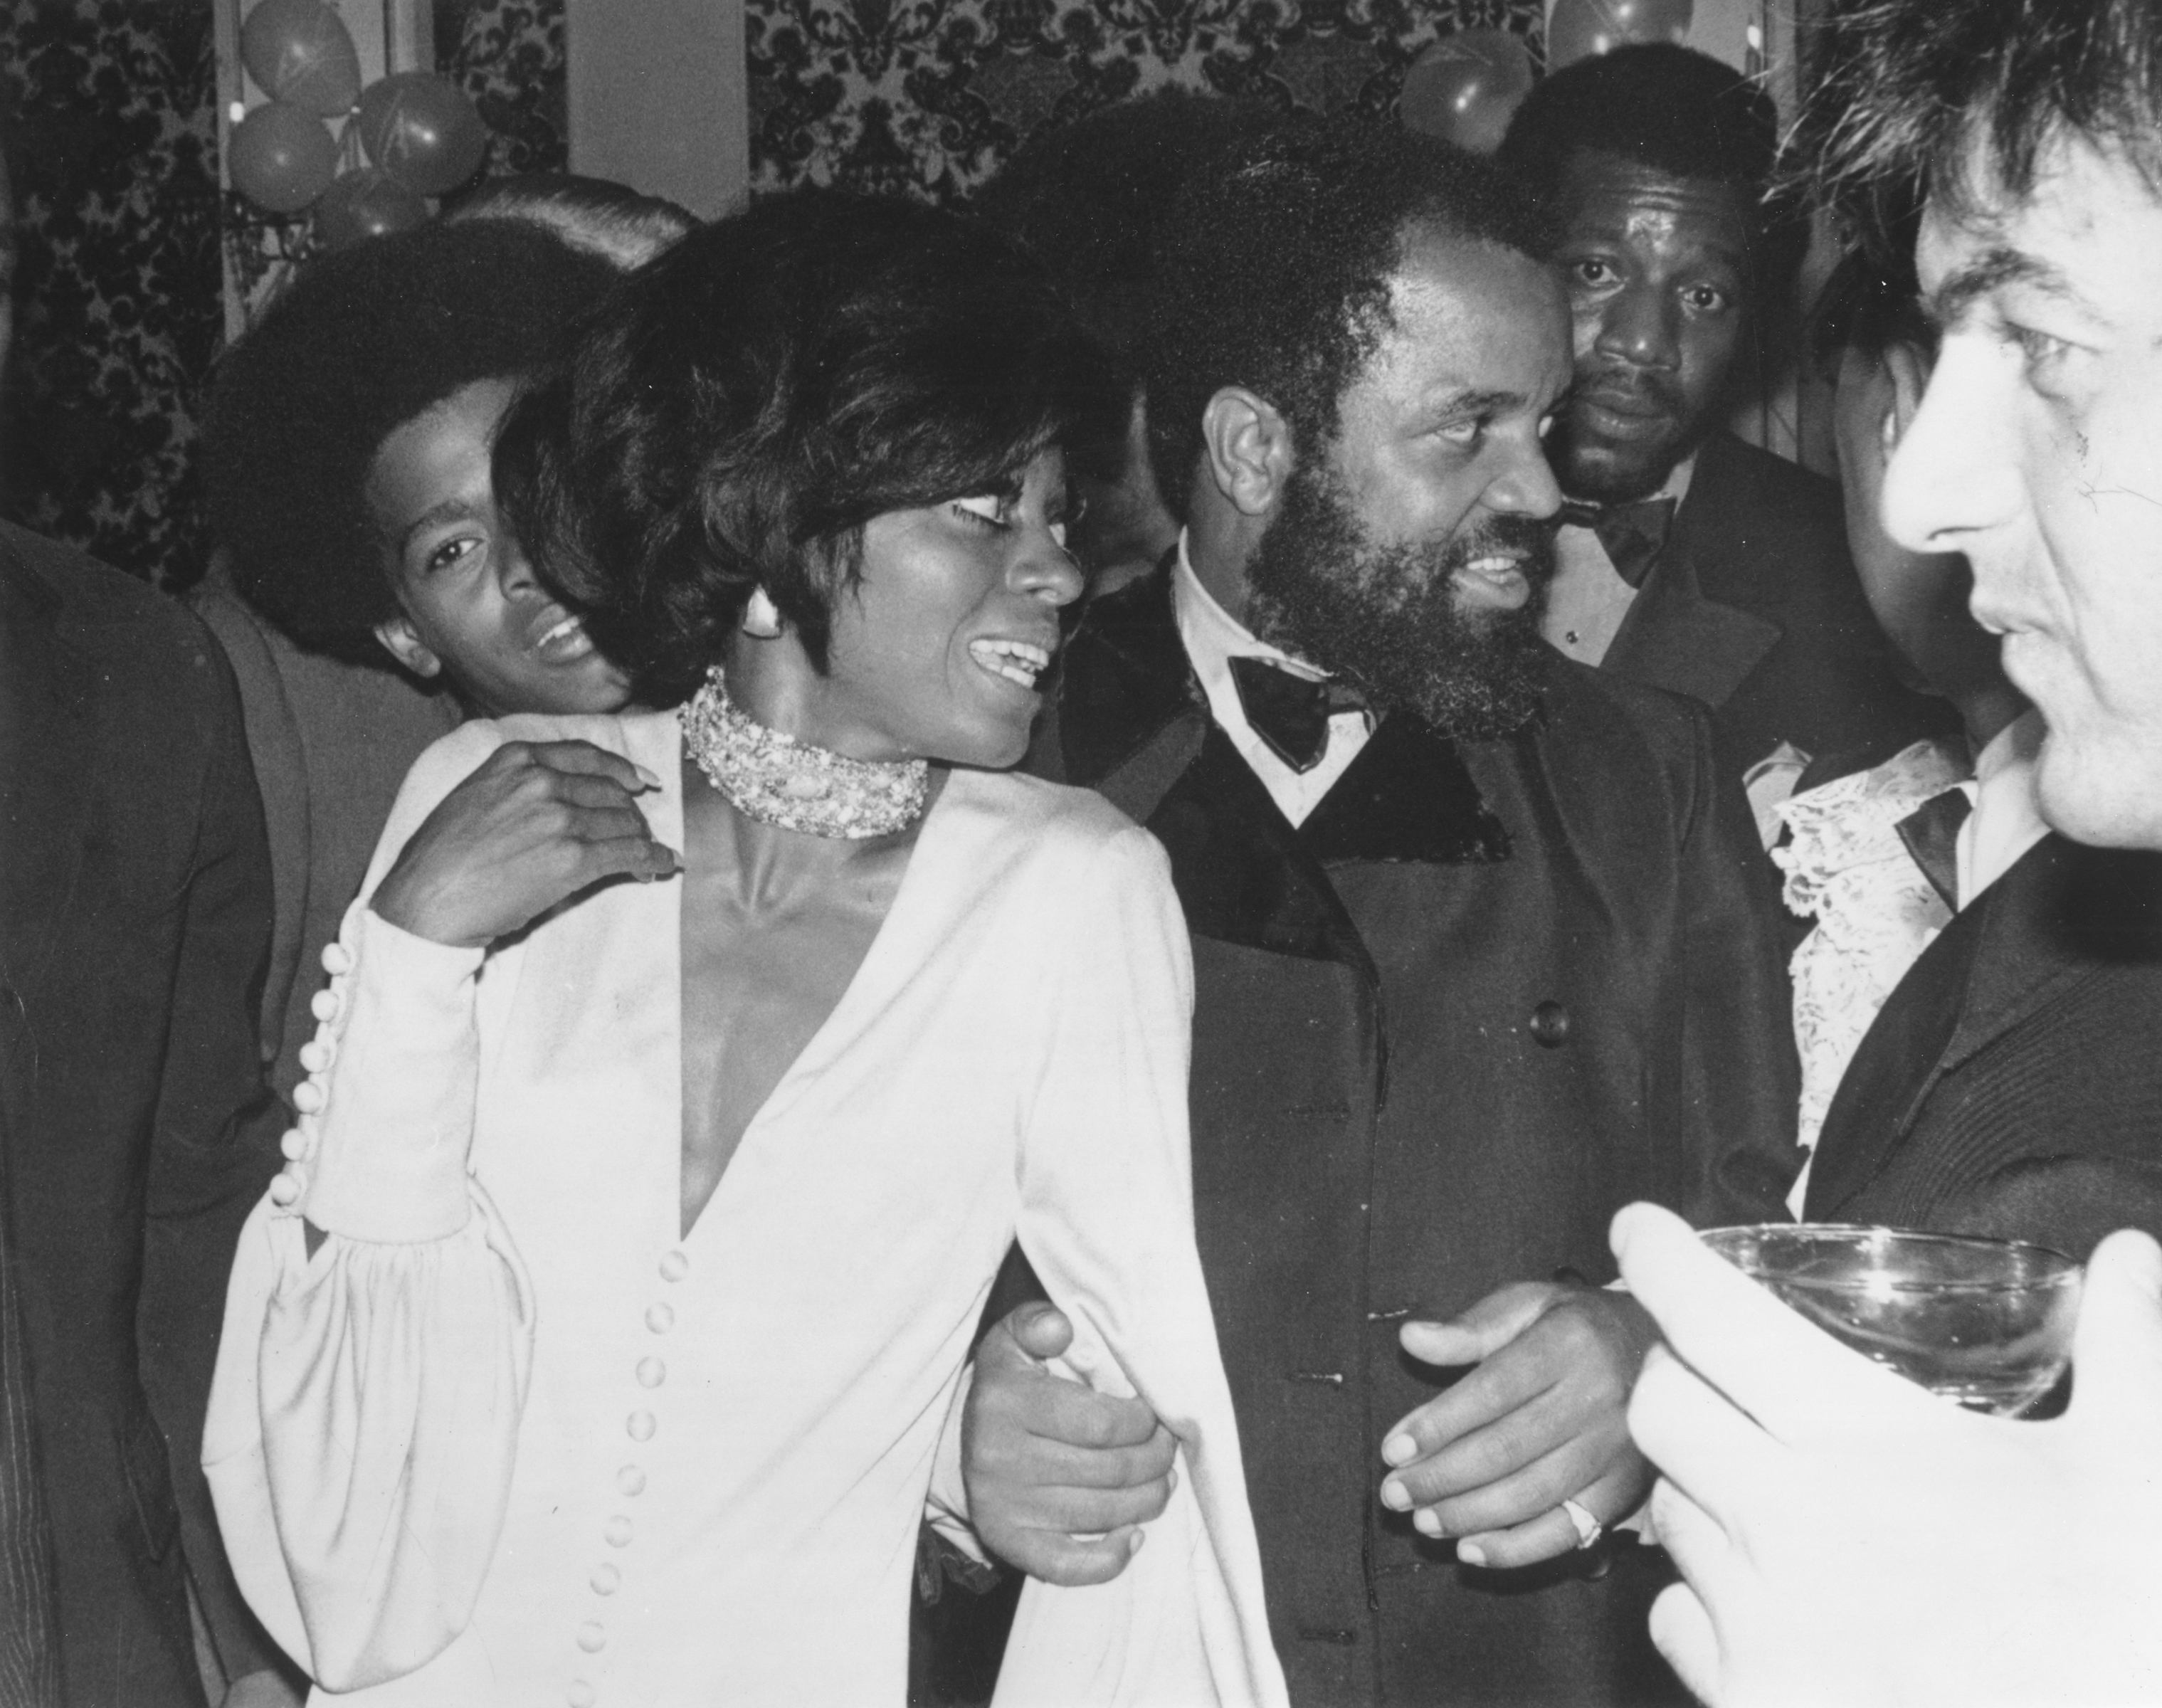 Diana Ross and Berry Gordy attending an event together and looking away from the camera.